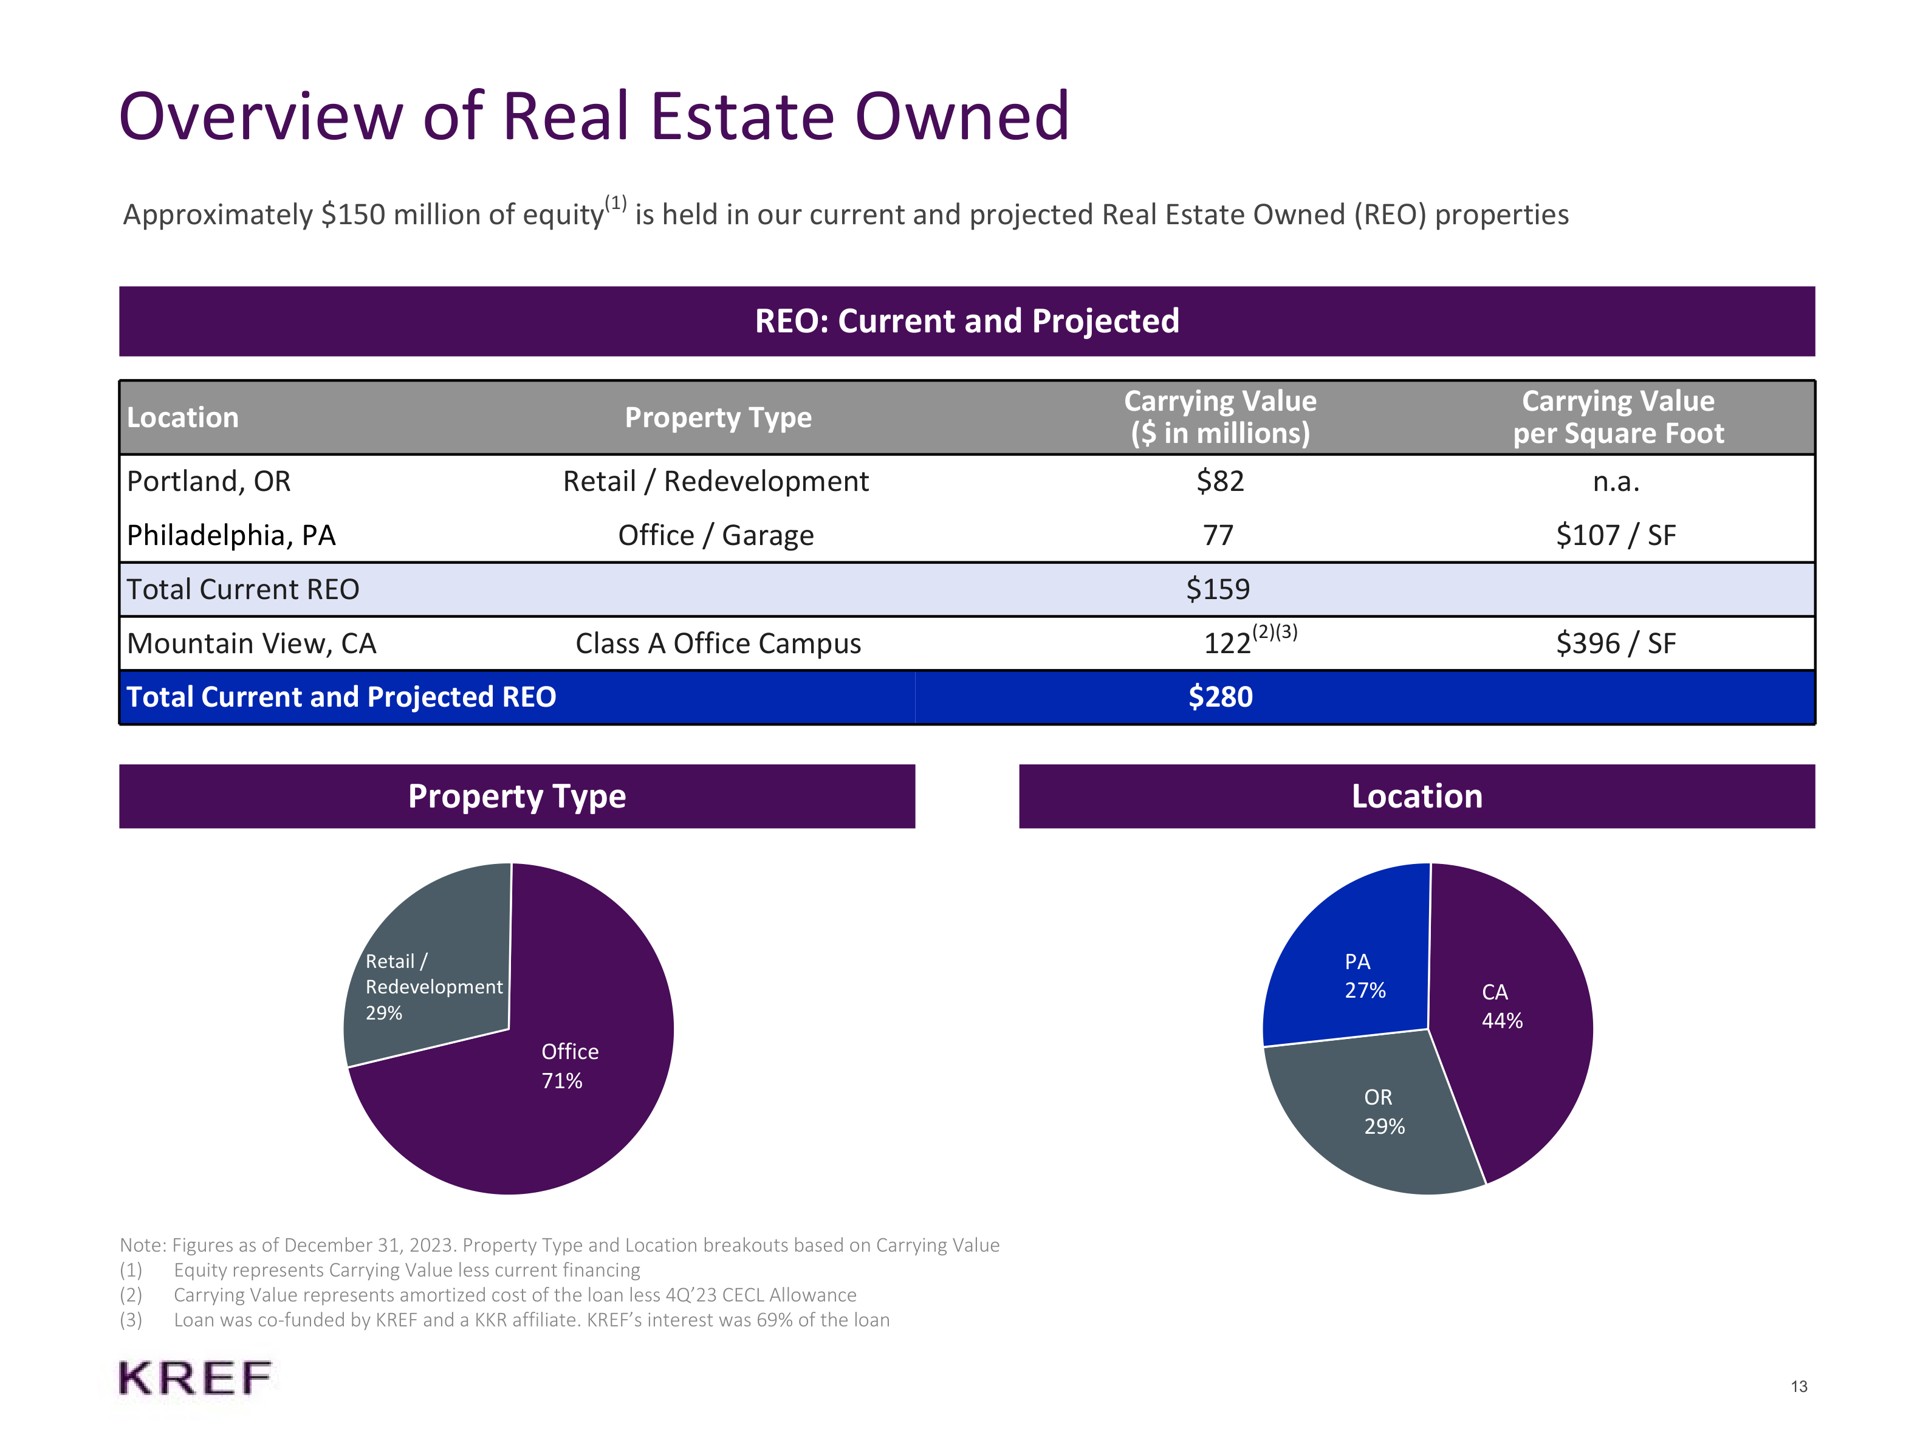 overview of real estate owned approximately million of equity is held in our current and projected real estate owned properties current and projected location or total current property type retail redevelopment office garage mountain view class a office campus total current and projected carrying value in millions carrying value per square foot a property type location as i | KKR Real Estate Finance Trust